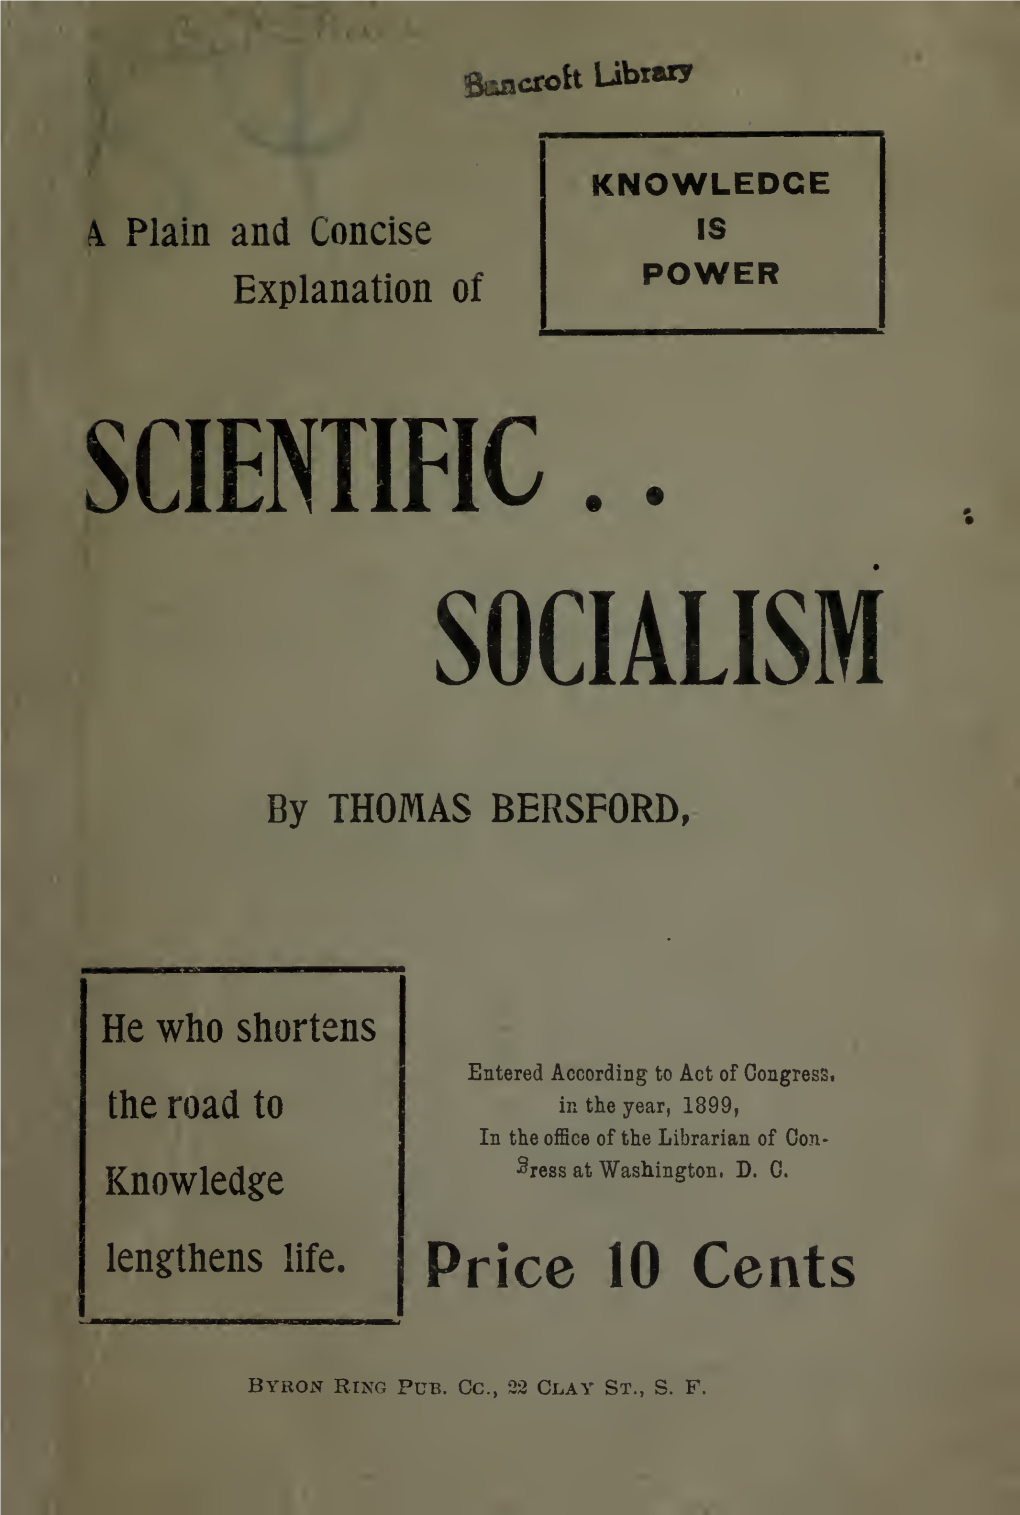 A Plain and Concise Explanation of Scientific Socialism